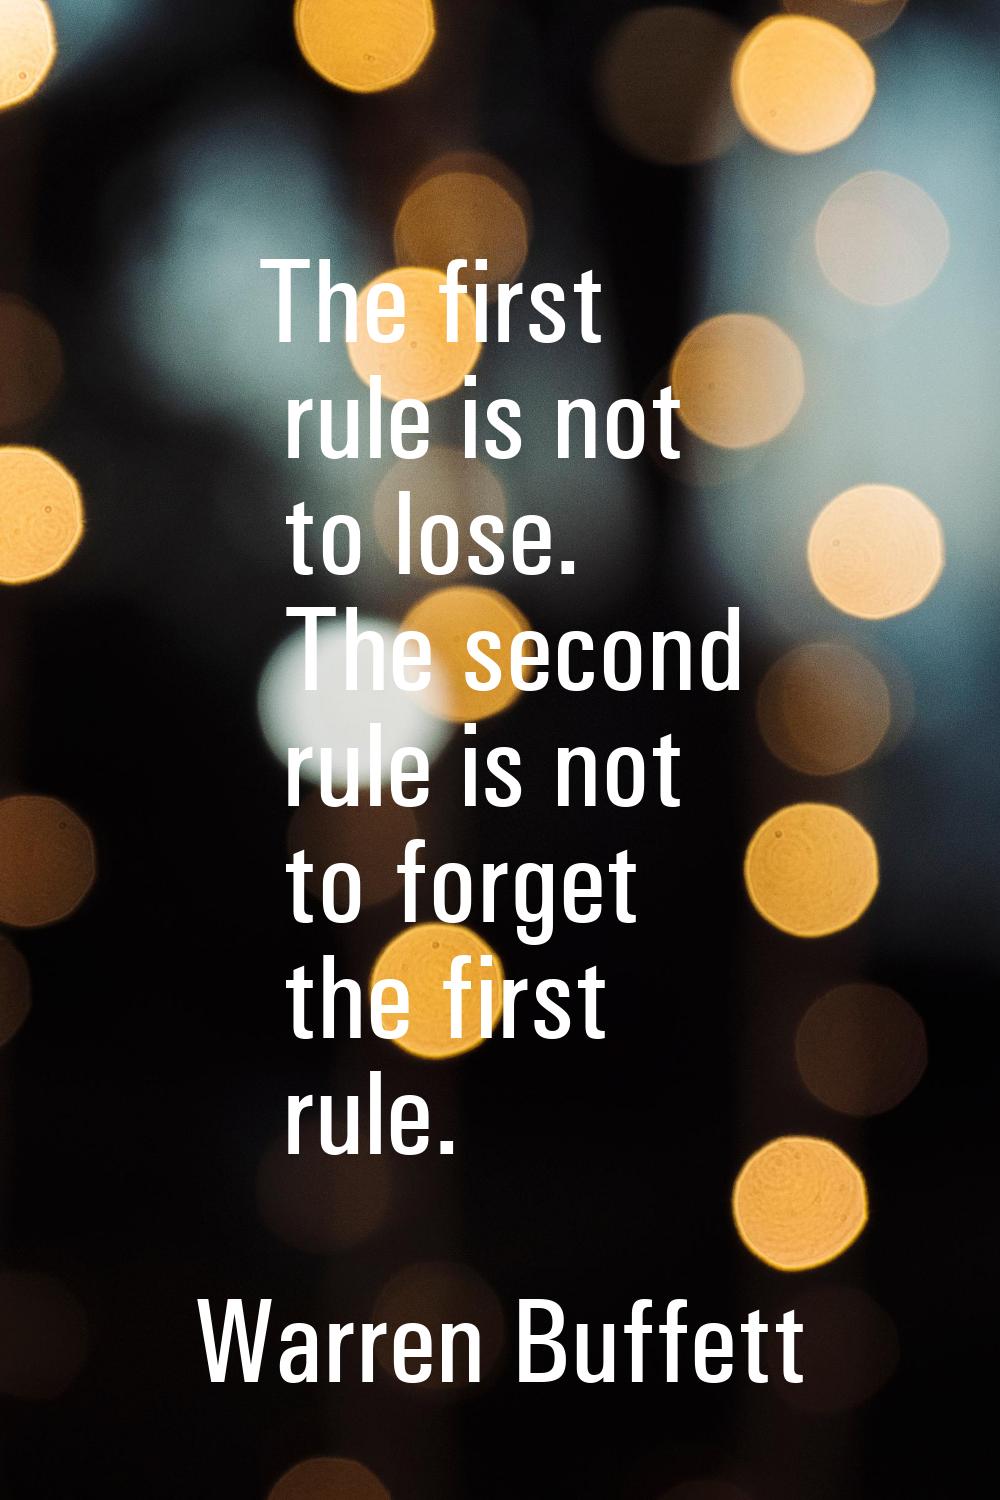 The first rule is not to lose. The second rule is not to forget the first rule.